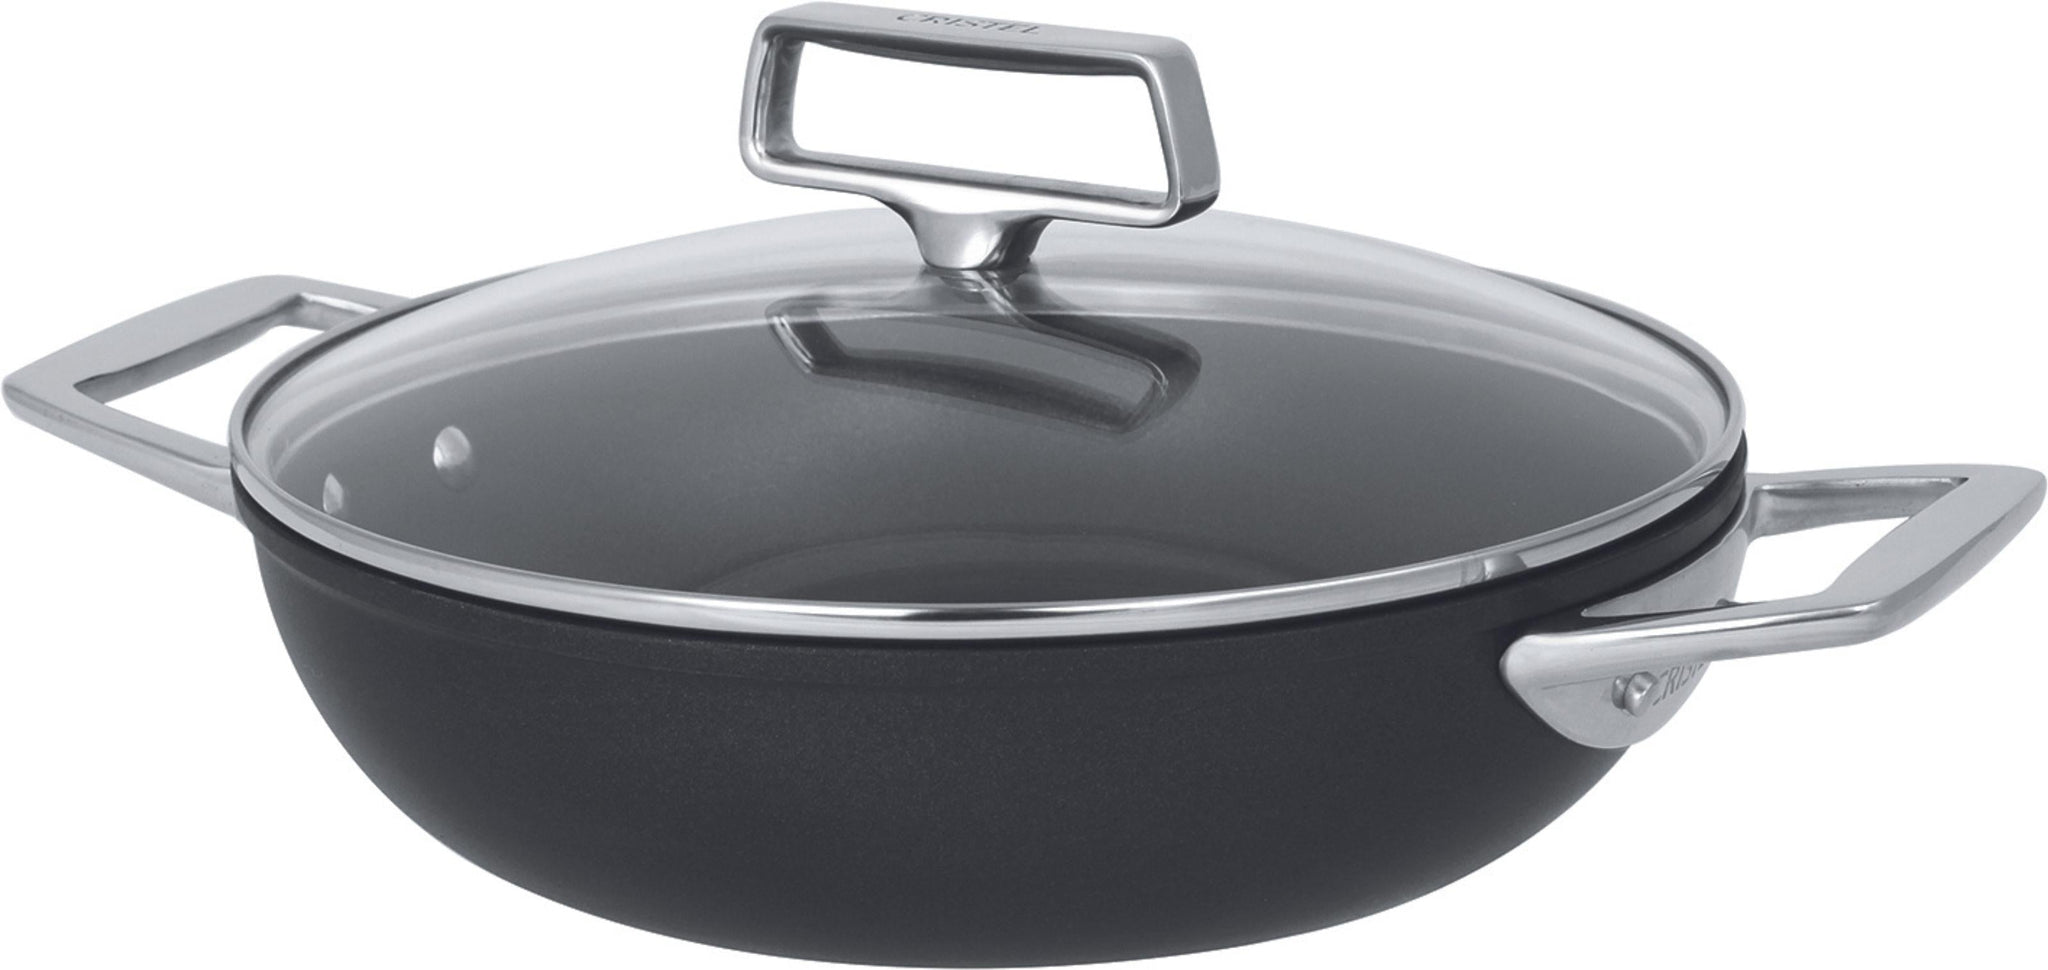 Cristel - 1.9 QT 2 Side Handles Non-Stick Sauté-Pan With Lid and Fixed Handle Castel'Pro Ultralu Collection - S2A24CPFAE